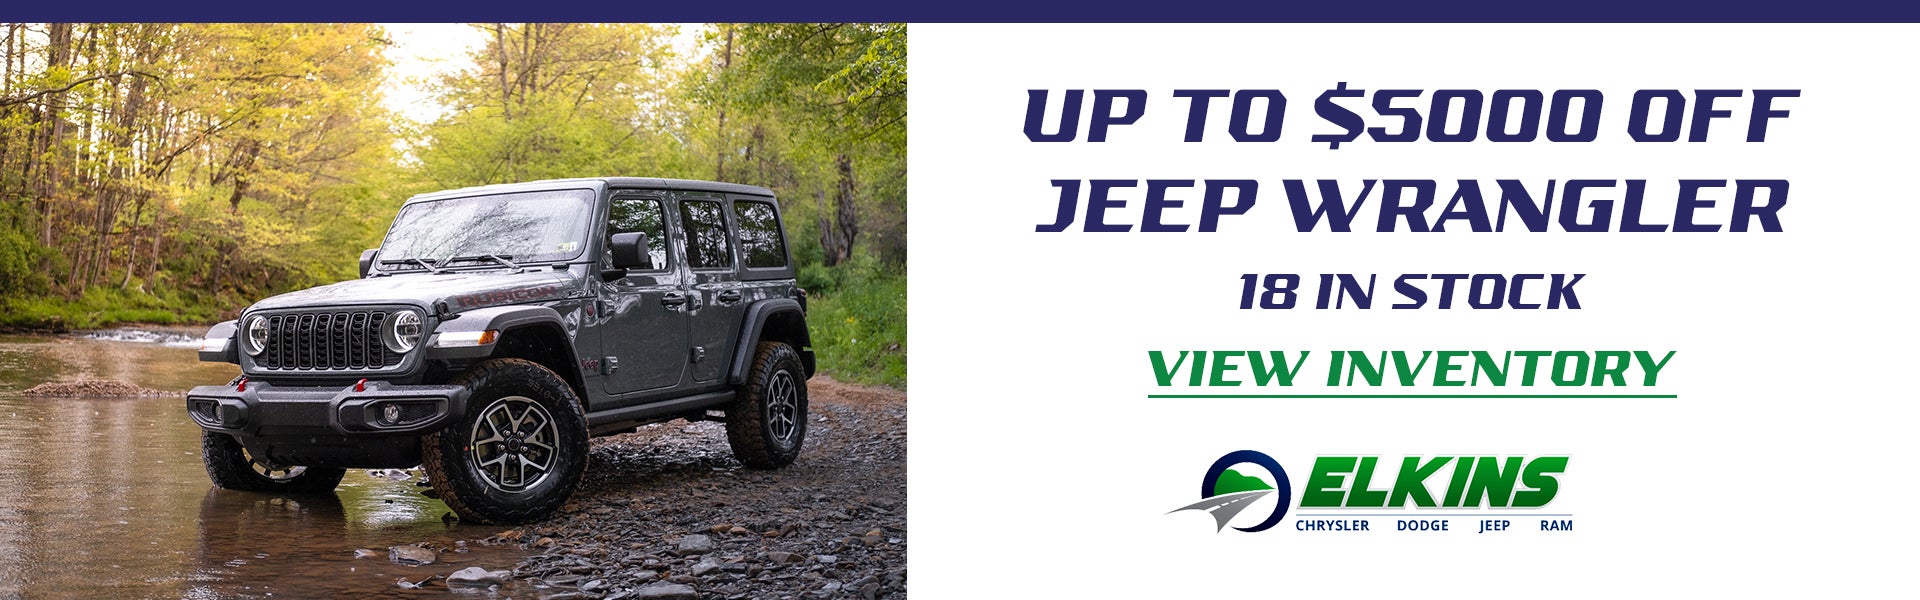 UP TO $5000 OFF JEEP WRANGLER